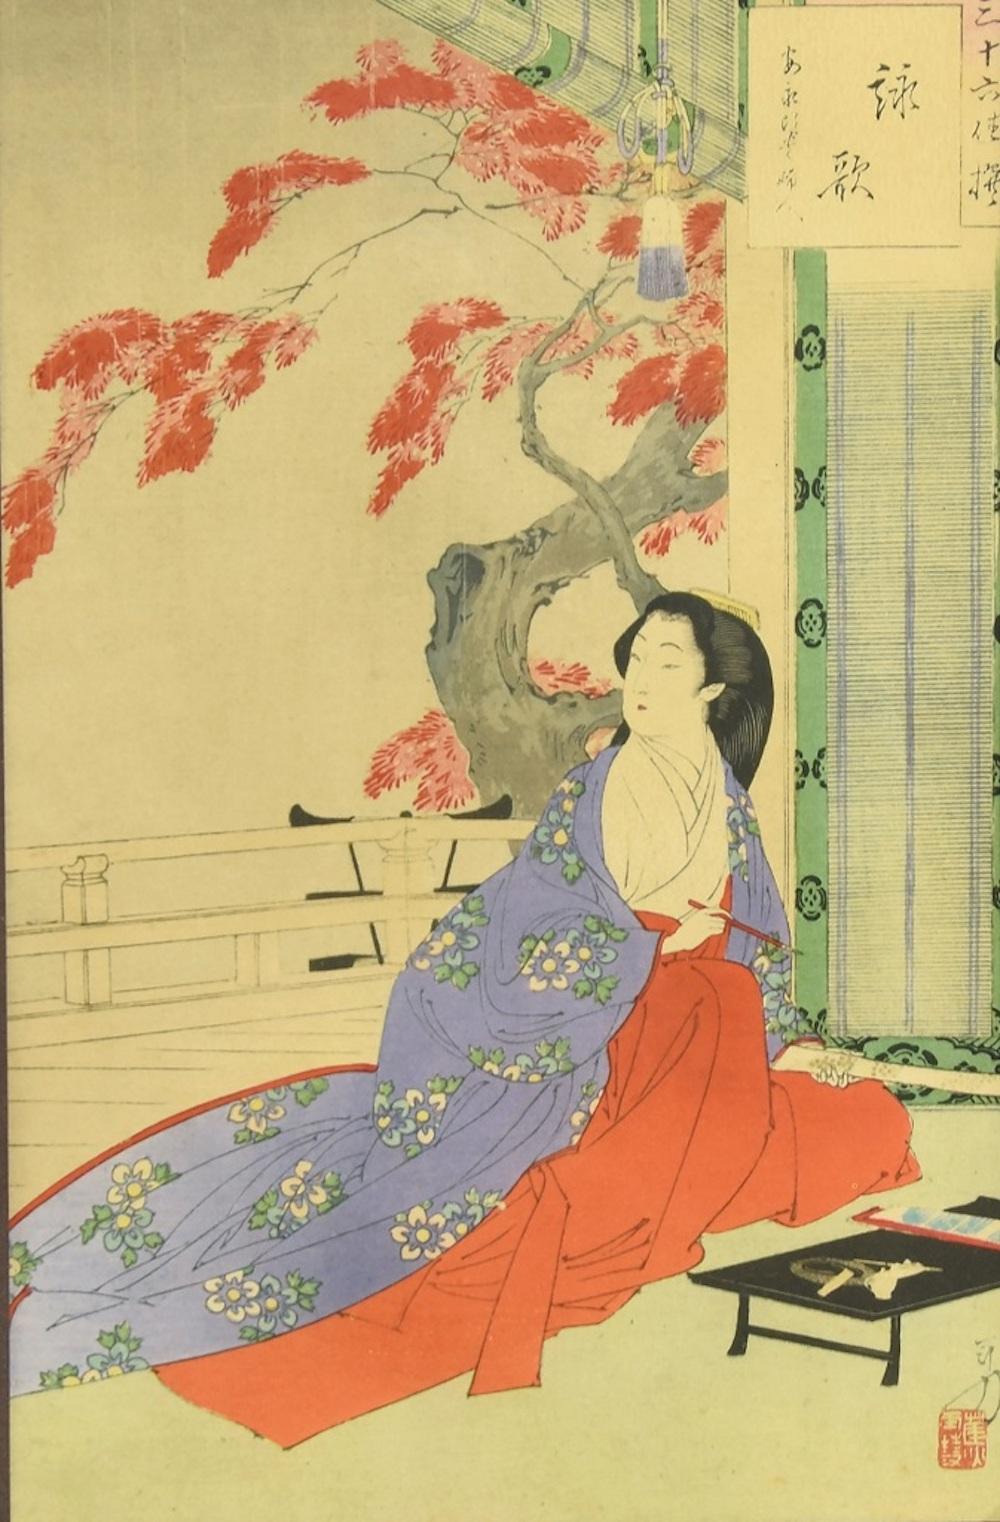 Composing a Poem is a mixed colored offset print realized in 1959 from an original artwork of 1891-93 by Mizuno Toshikata (1866-1908) 

The artwork is from the harmonica book "Trentasei Grazie Giapponesi (36 graceful Japanese prints)" by Mario Teti